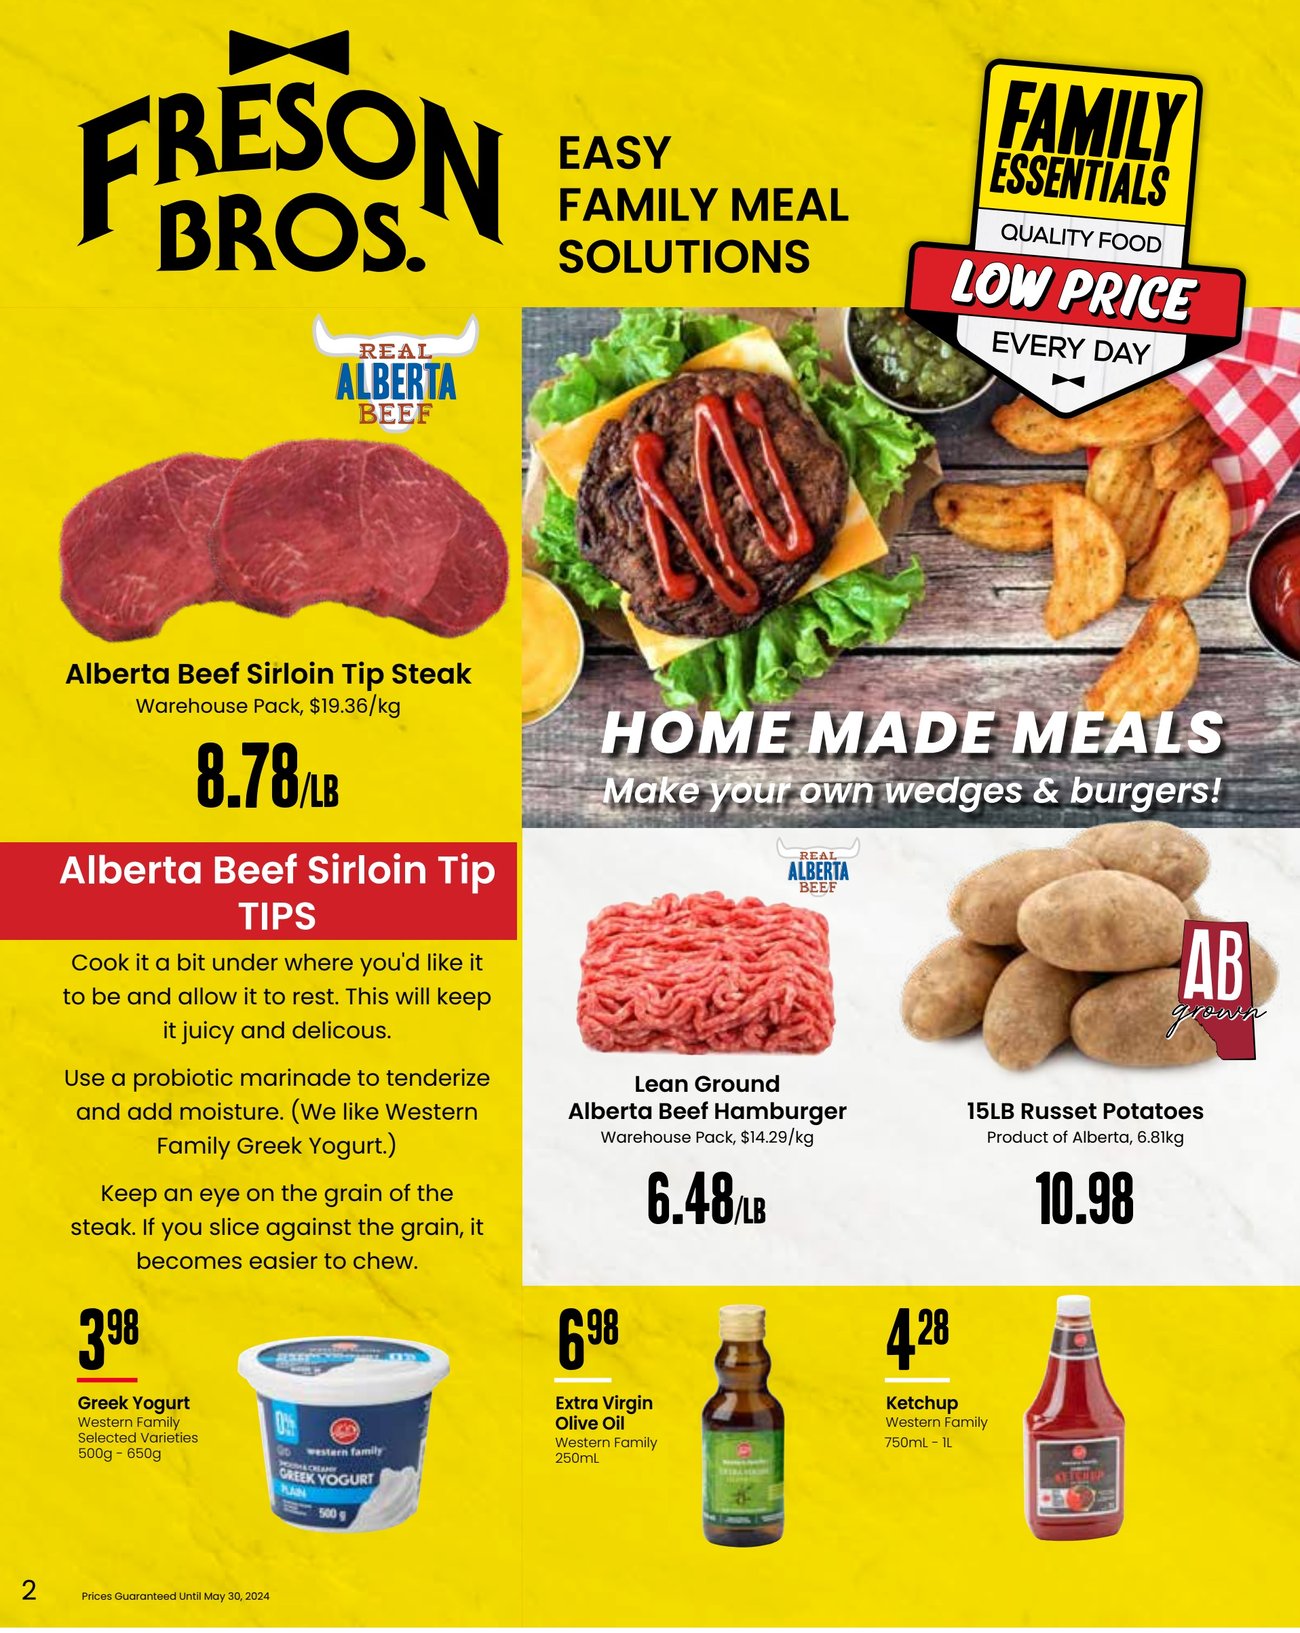 Freson Bros - Flyer Specials - Easy Family Meals - Page 2